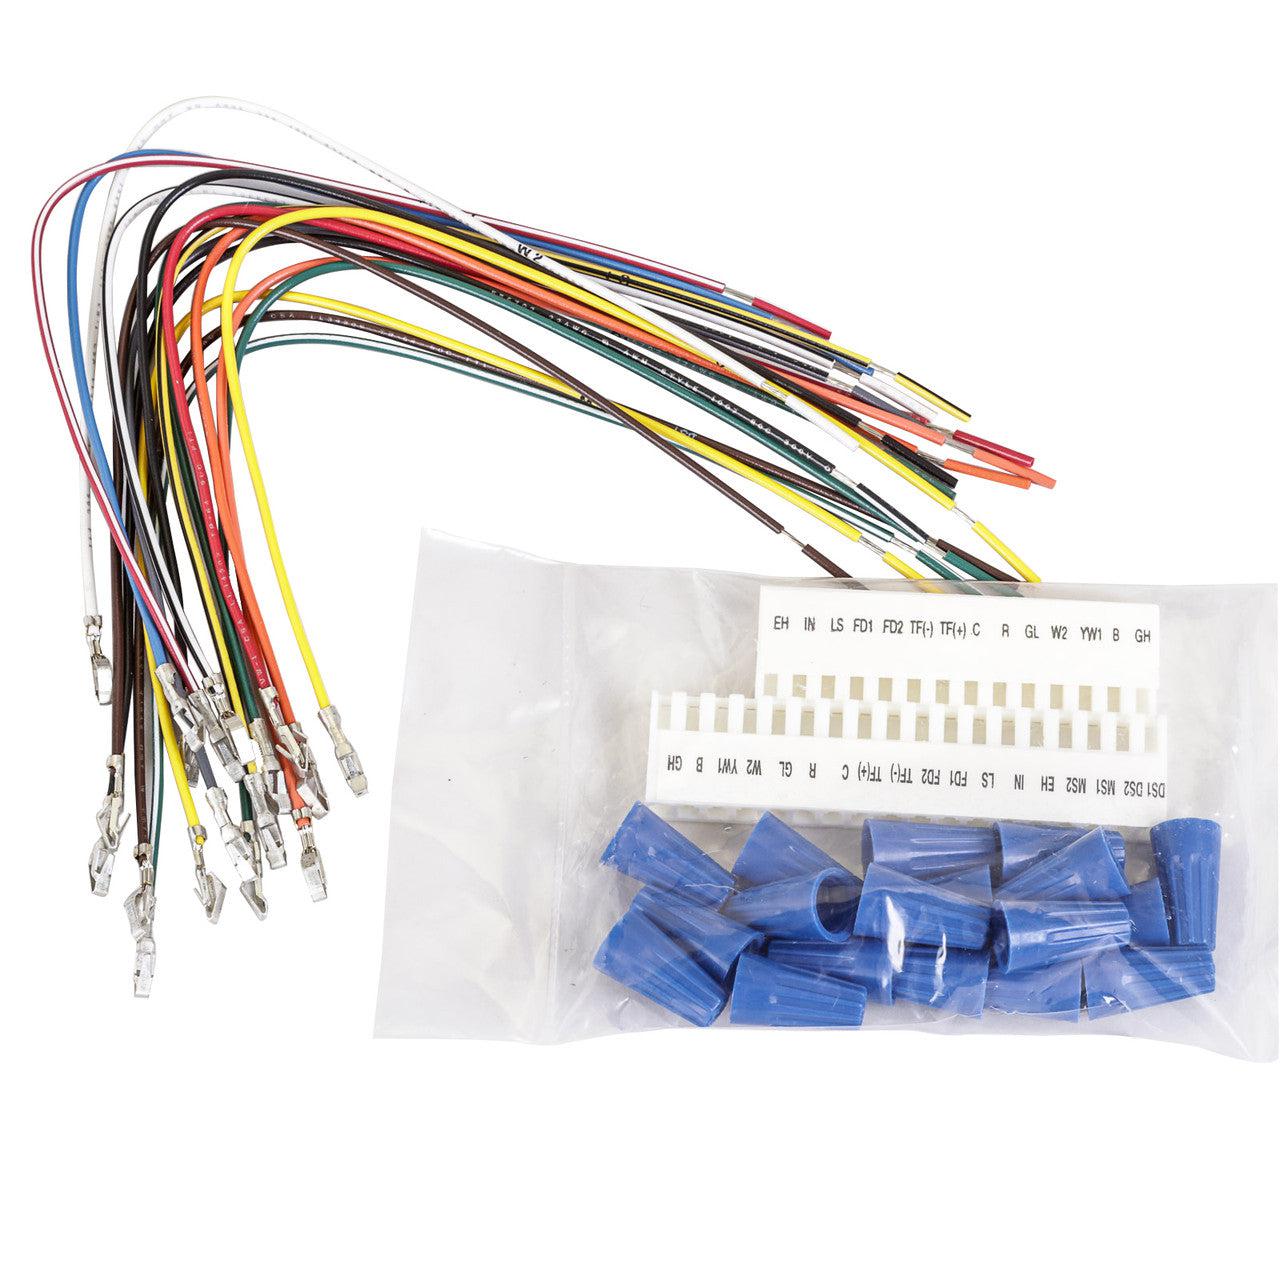 Goodman-Amana Wiring Harness Kit for Remote Wall Thermostat